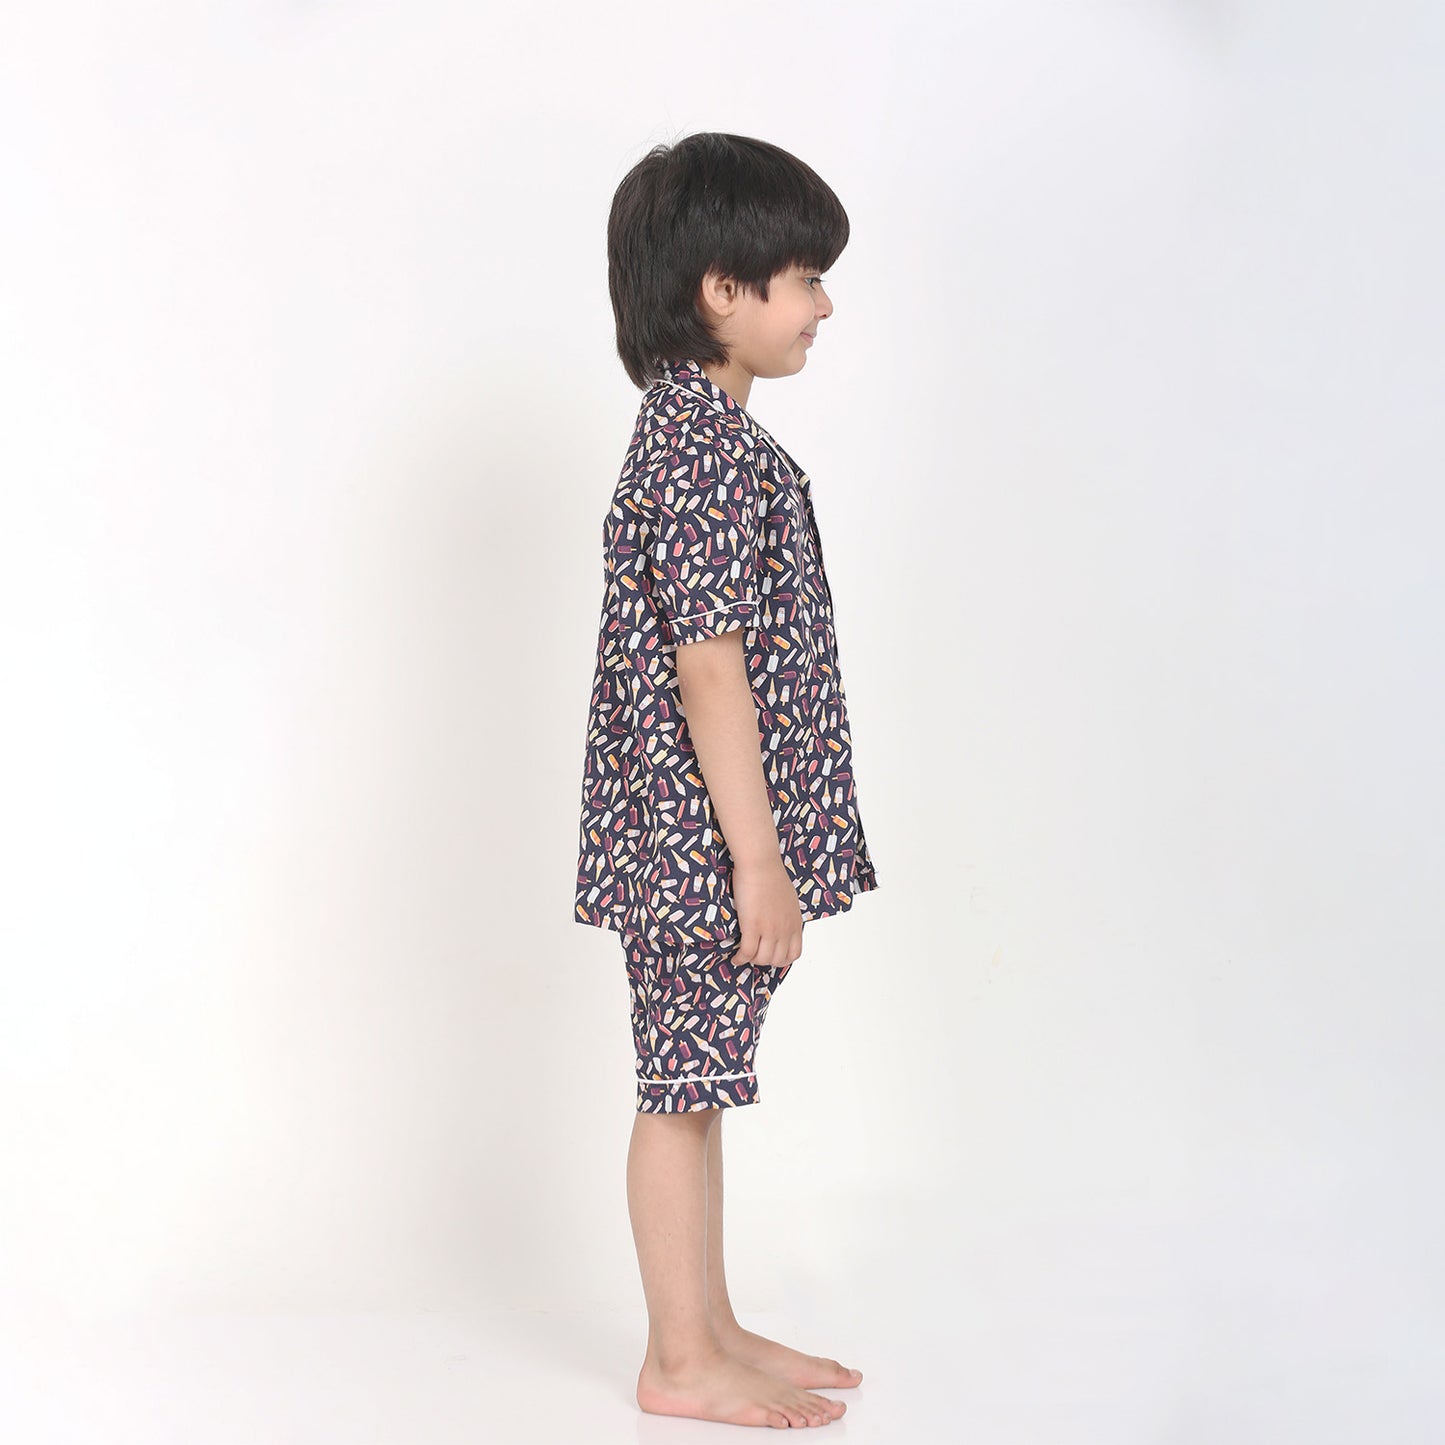 Notched Collared Sleepsuit in Icecream Print for Girls & Boys